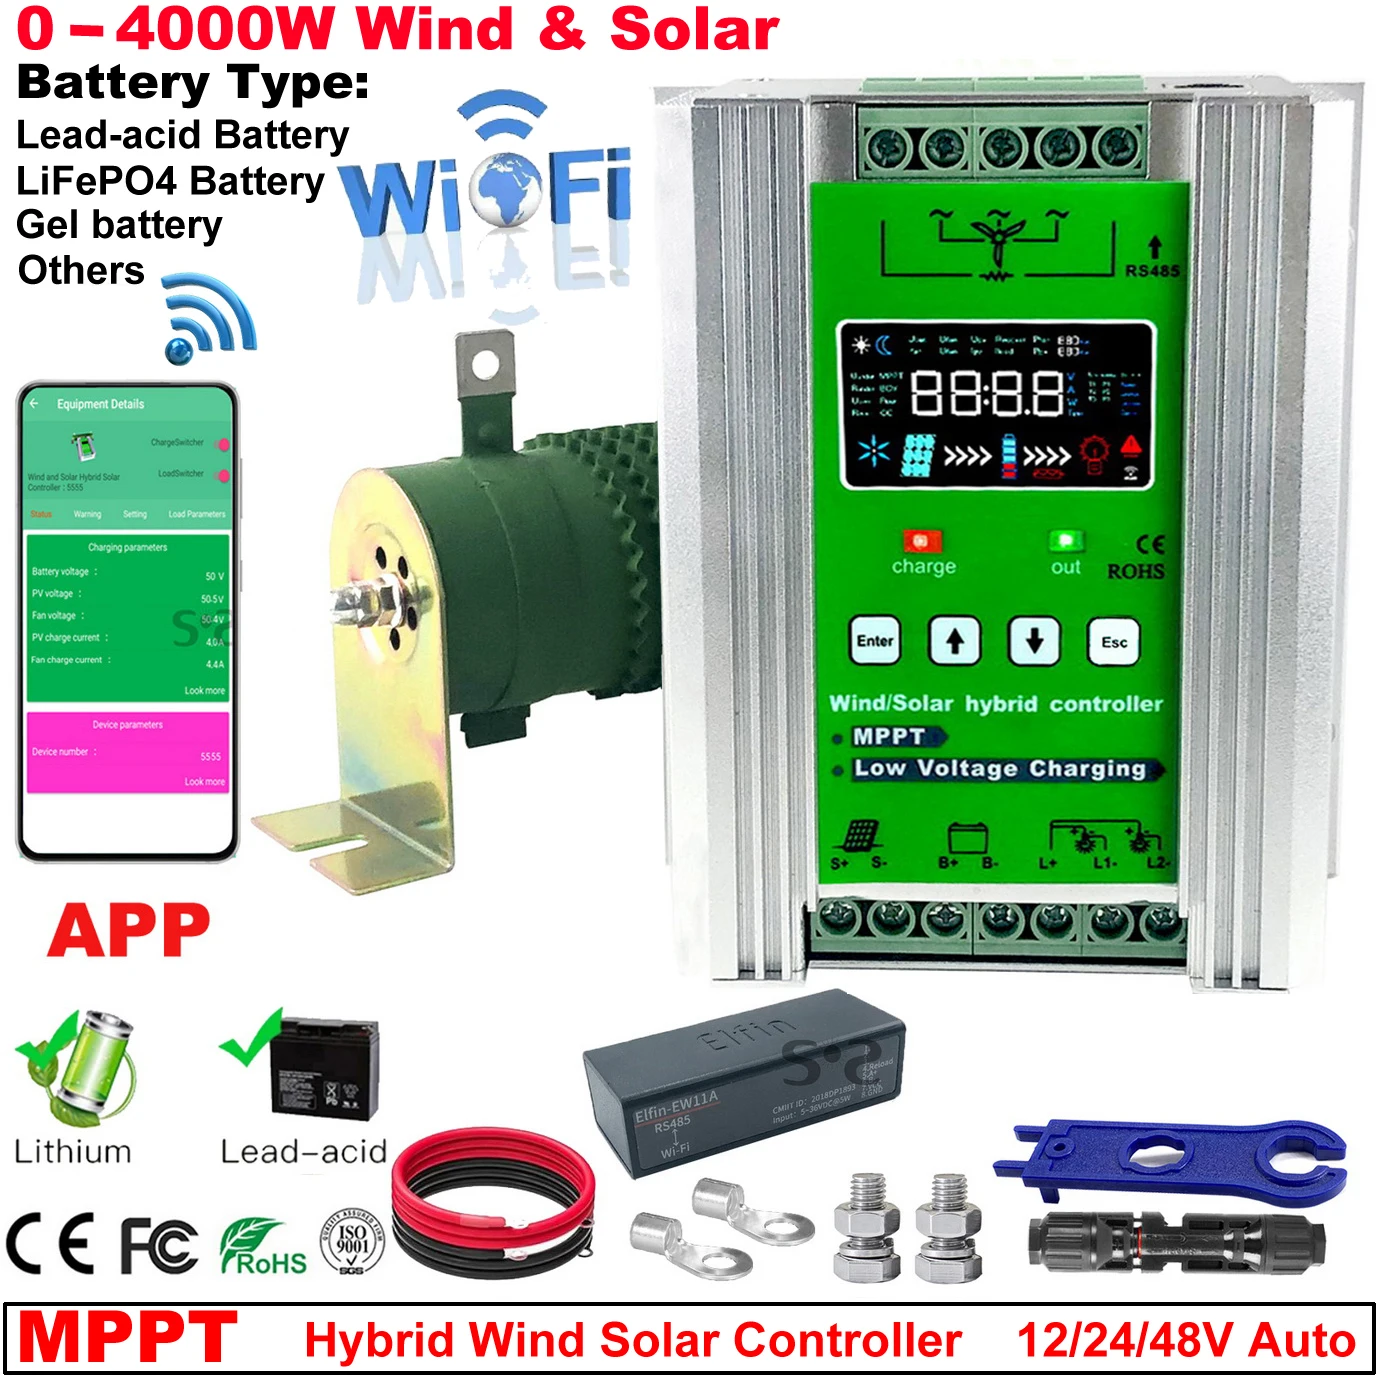 

12V 24V 48V 3000W MPPT Hybrid Wind Solar Charge Booster Controller With WIFI For 1500W Wind Turbine Generator 1500W Solar Panel